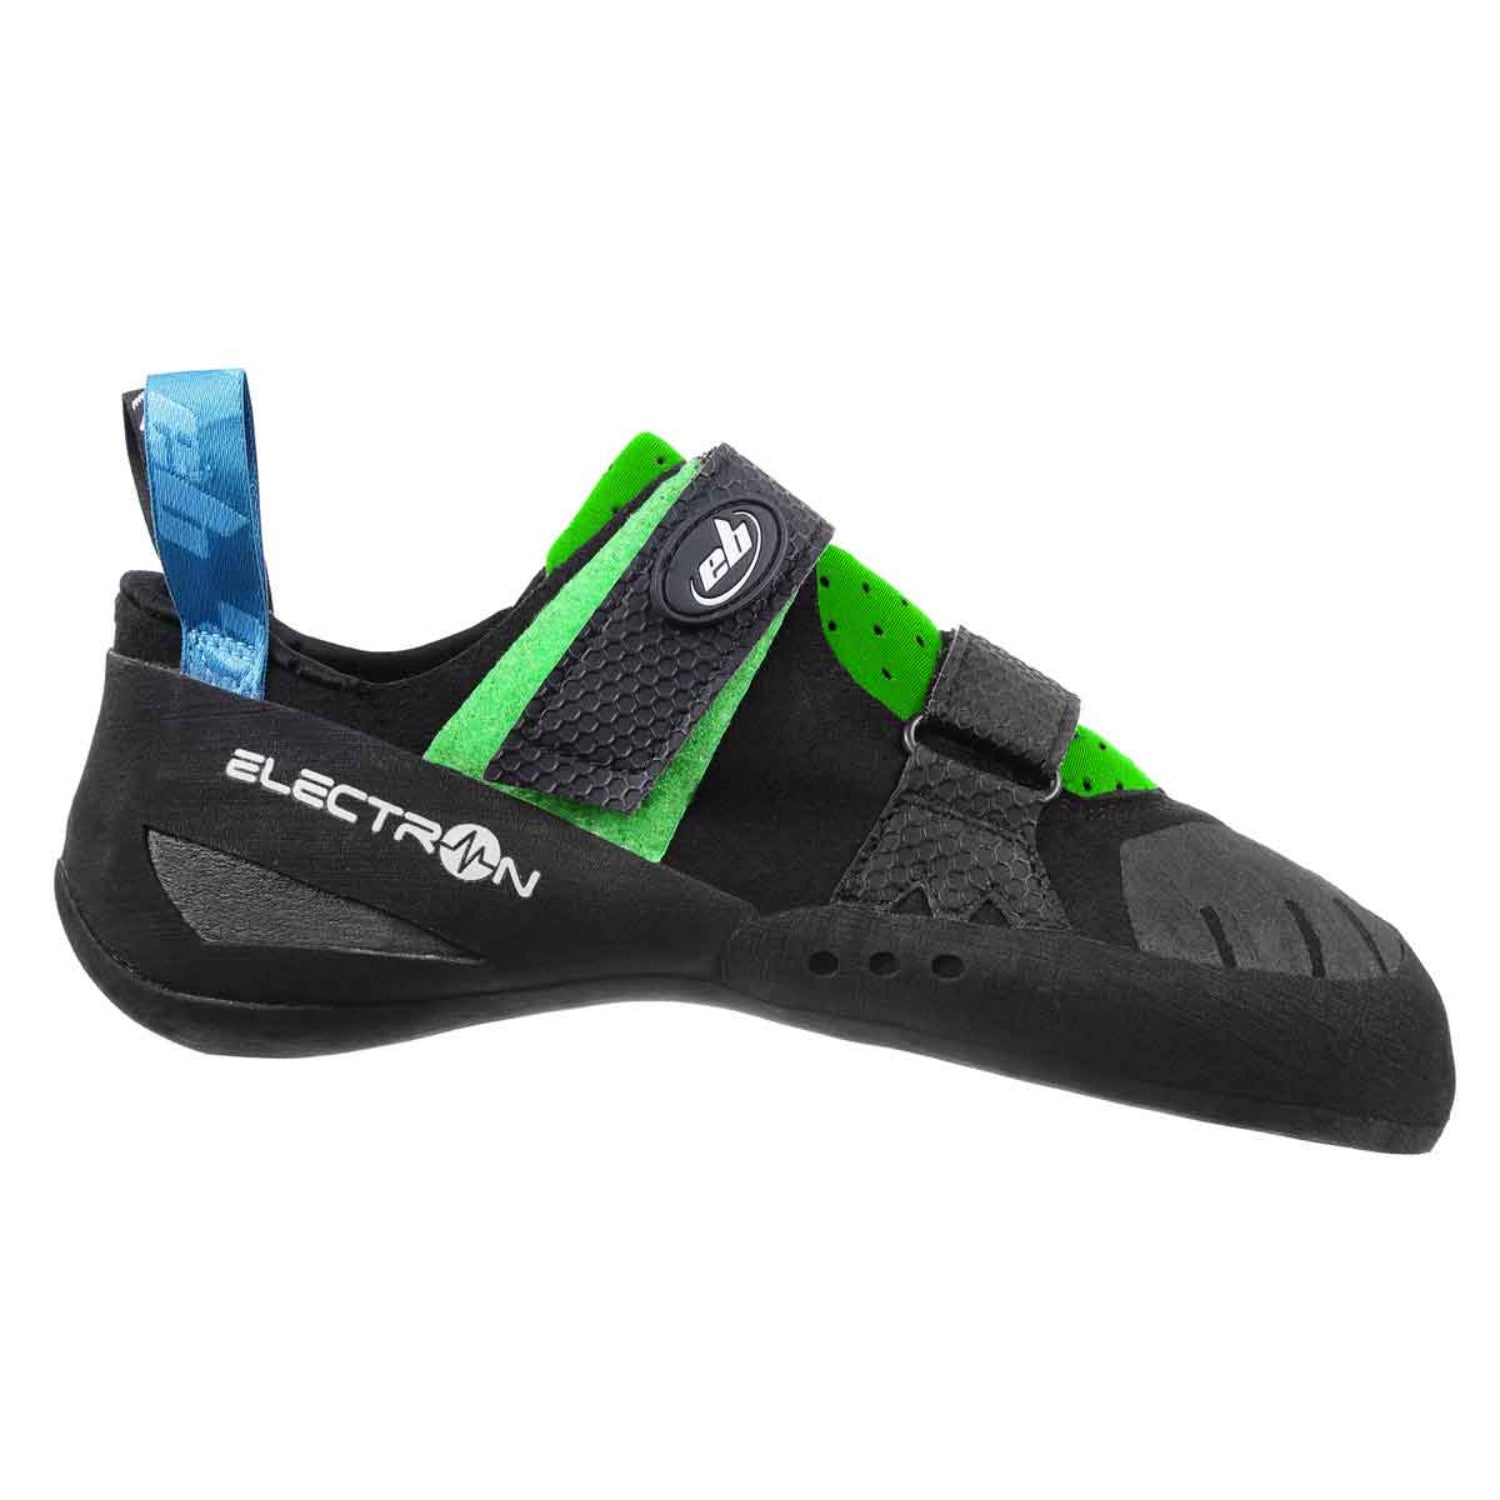 EB Electron climbing shoes from the side showing logo and straps